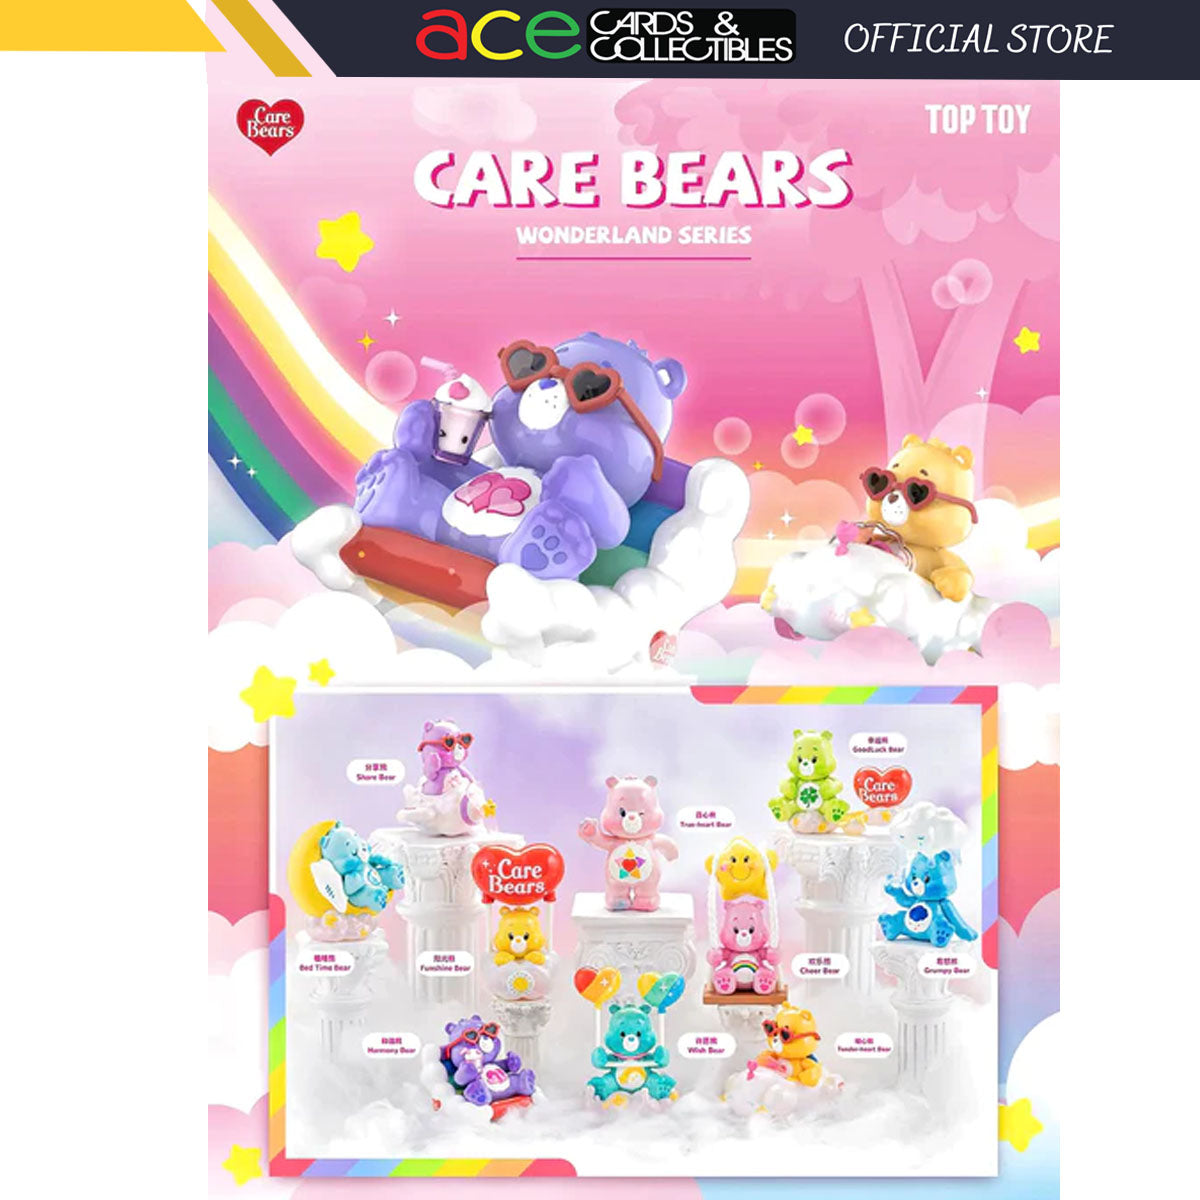 TOPTOY Care Bears Wonderland Series-Single Box (Random)-TopToy-Ace Cards &amp; Collectibles